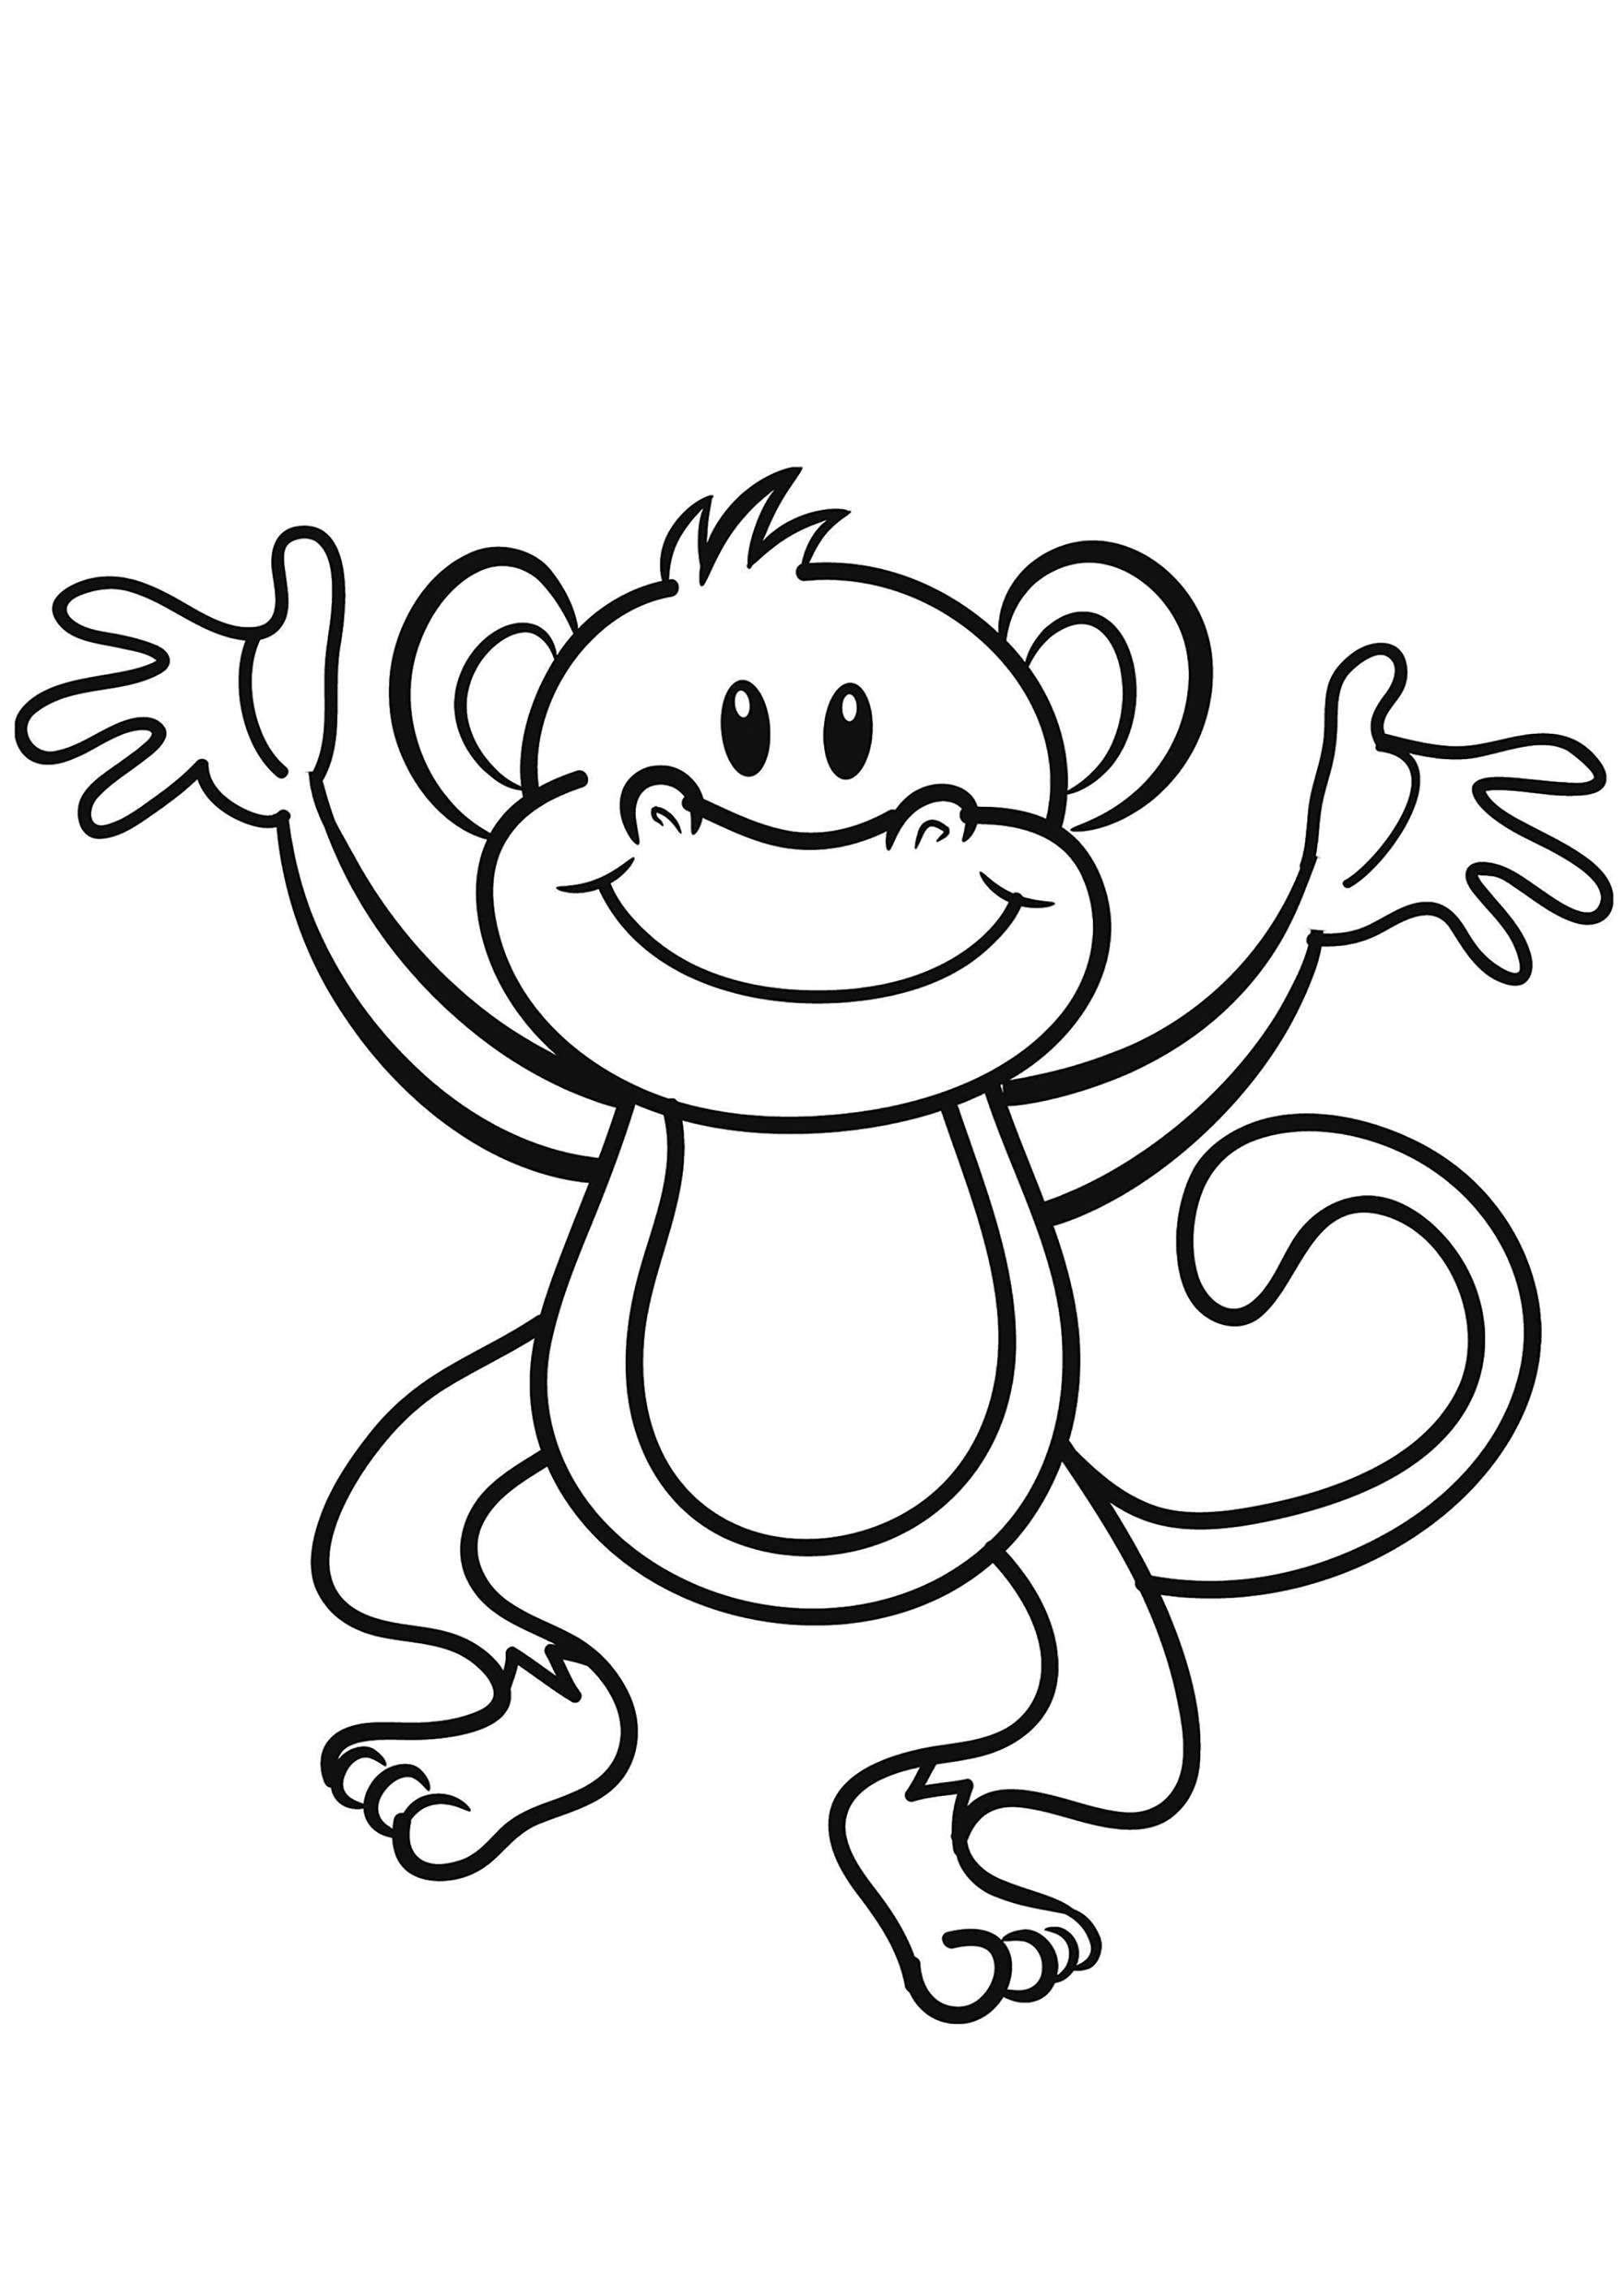 Free monkey drawing to download and color Monkeys Kids Coloring Pages